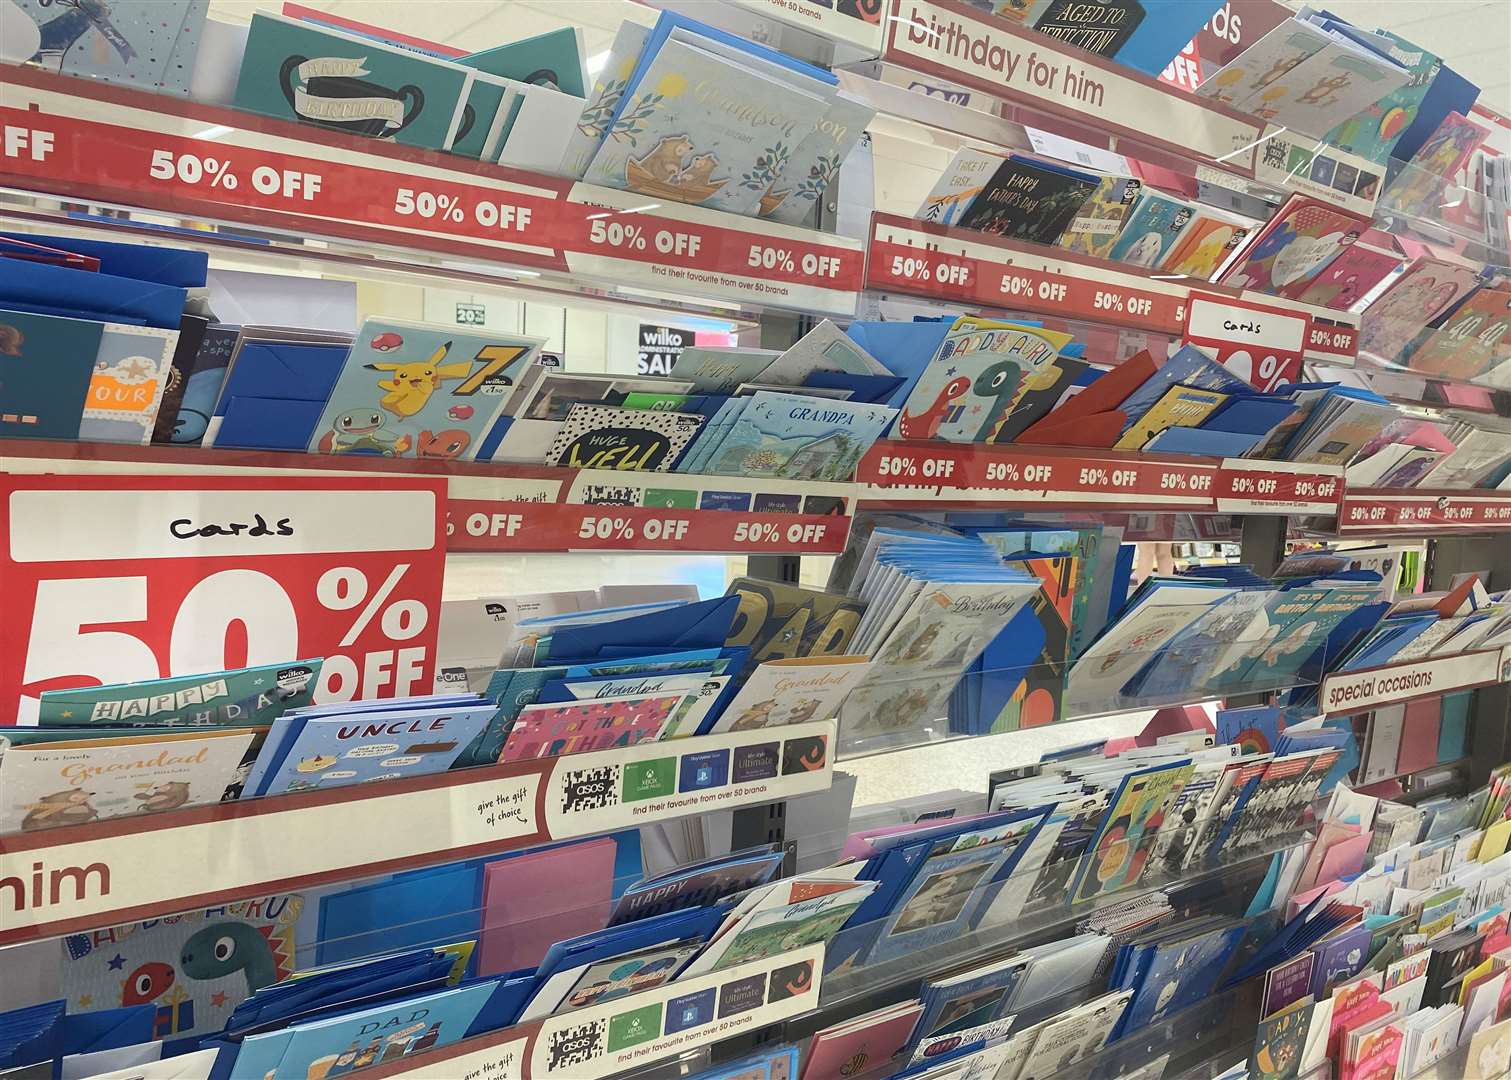 Cards in Ashford's Wilko are on sale at 50% off